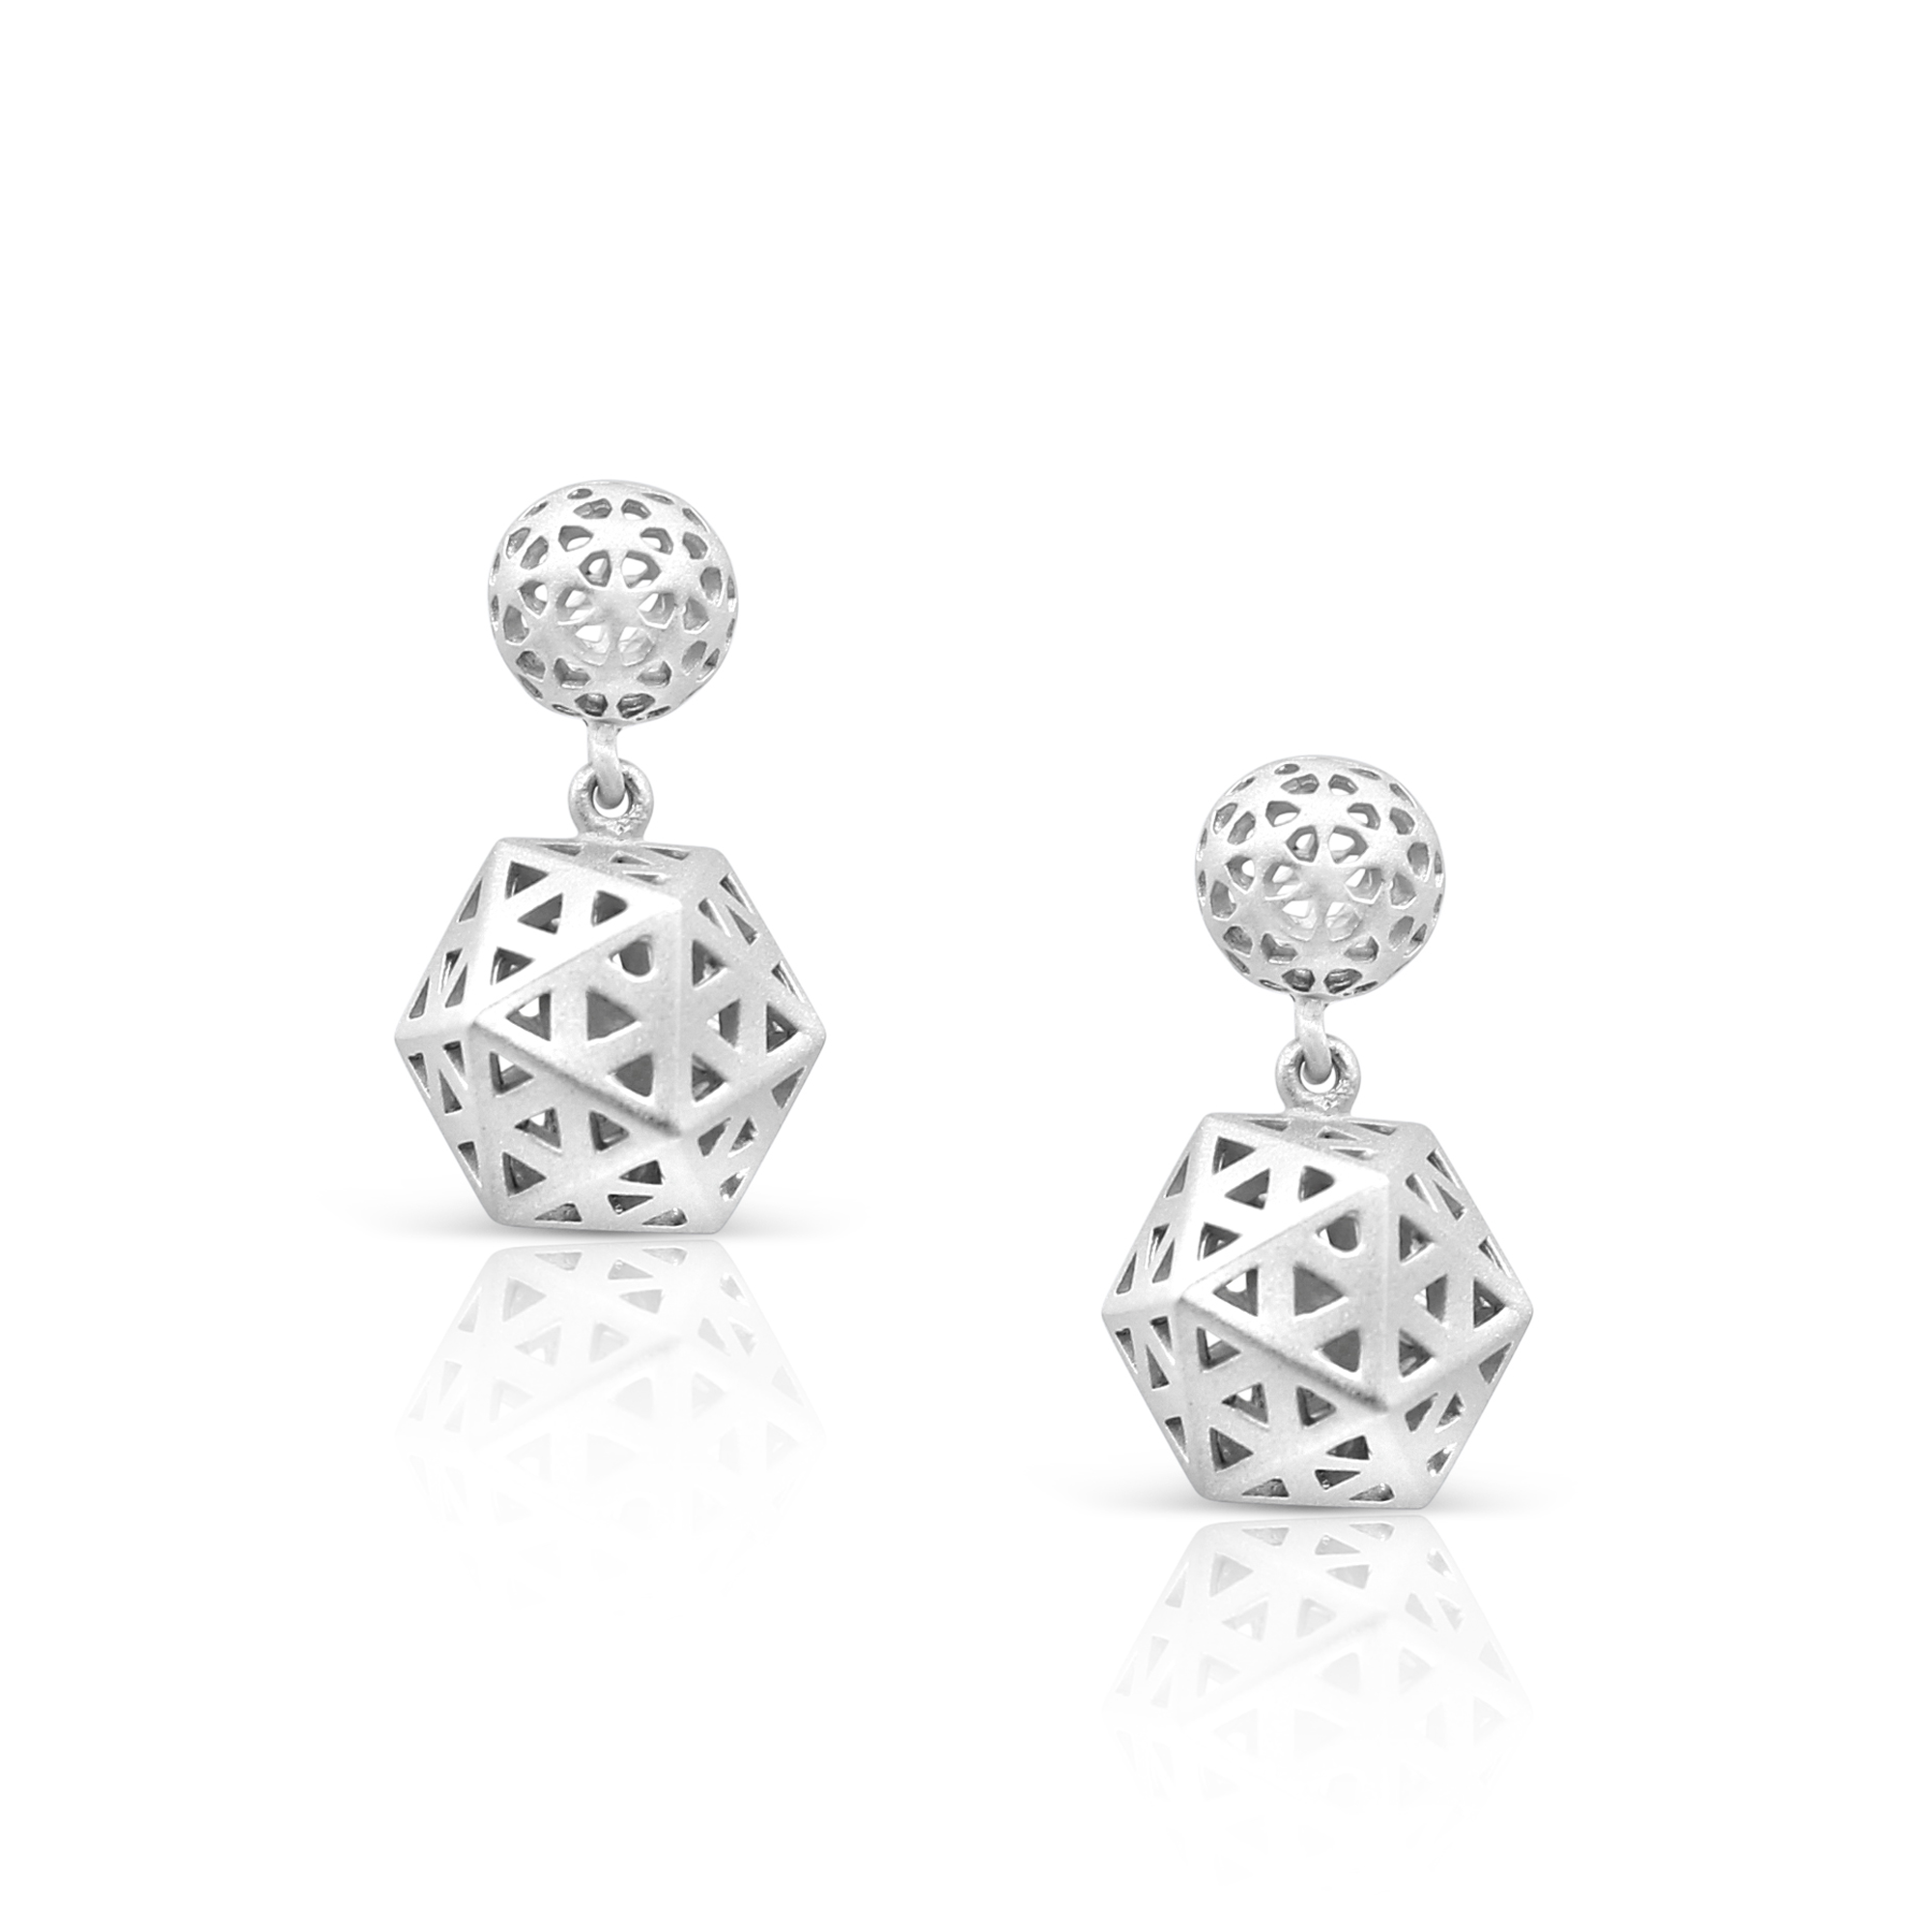 White Rhodium Plated 925 Sterling Silver Earrings Designer Fine Jewelry Matte Finish